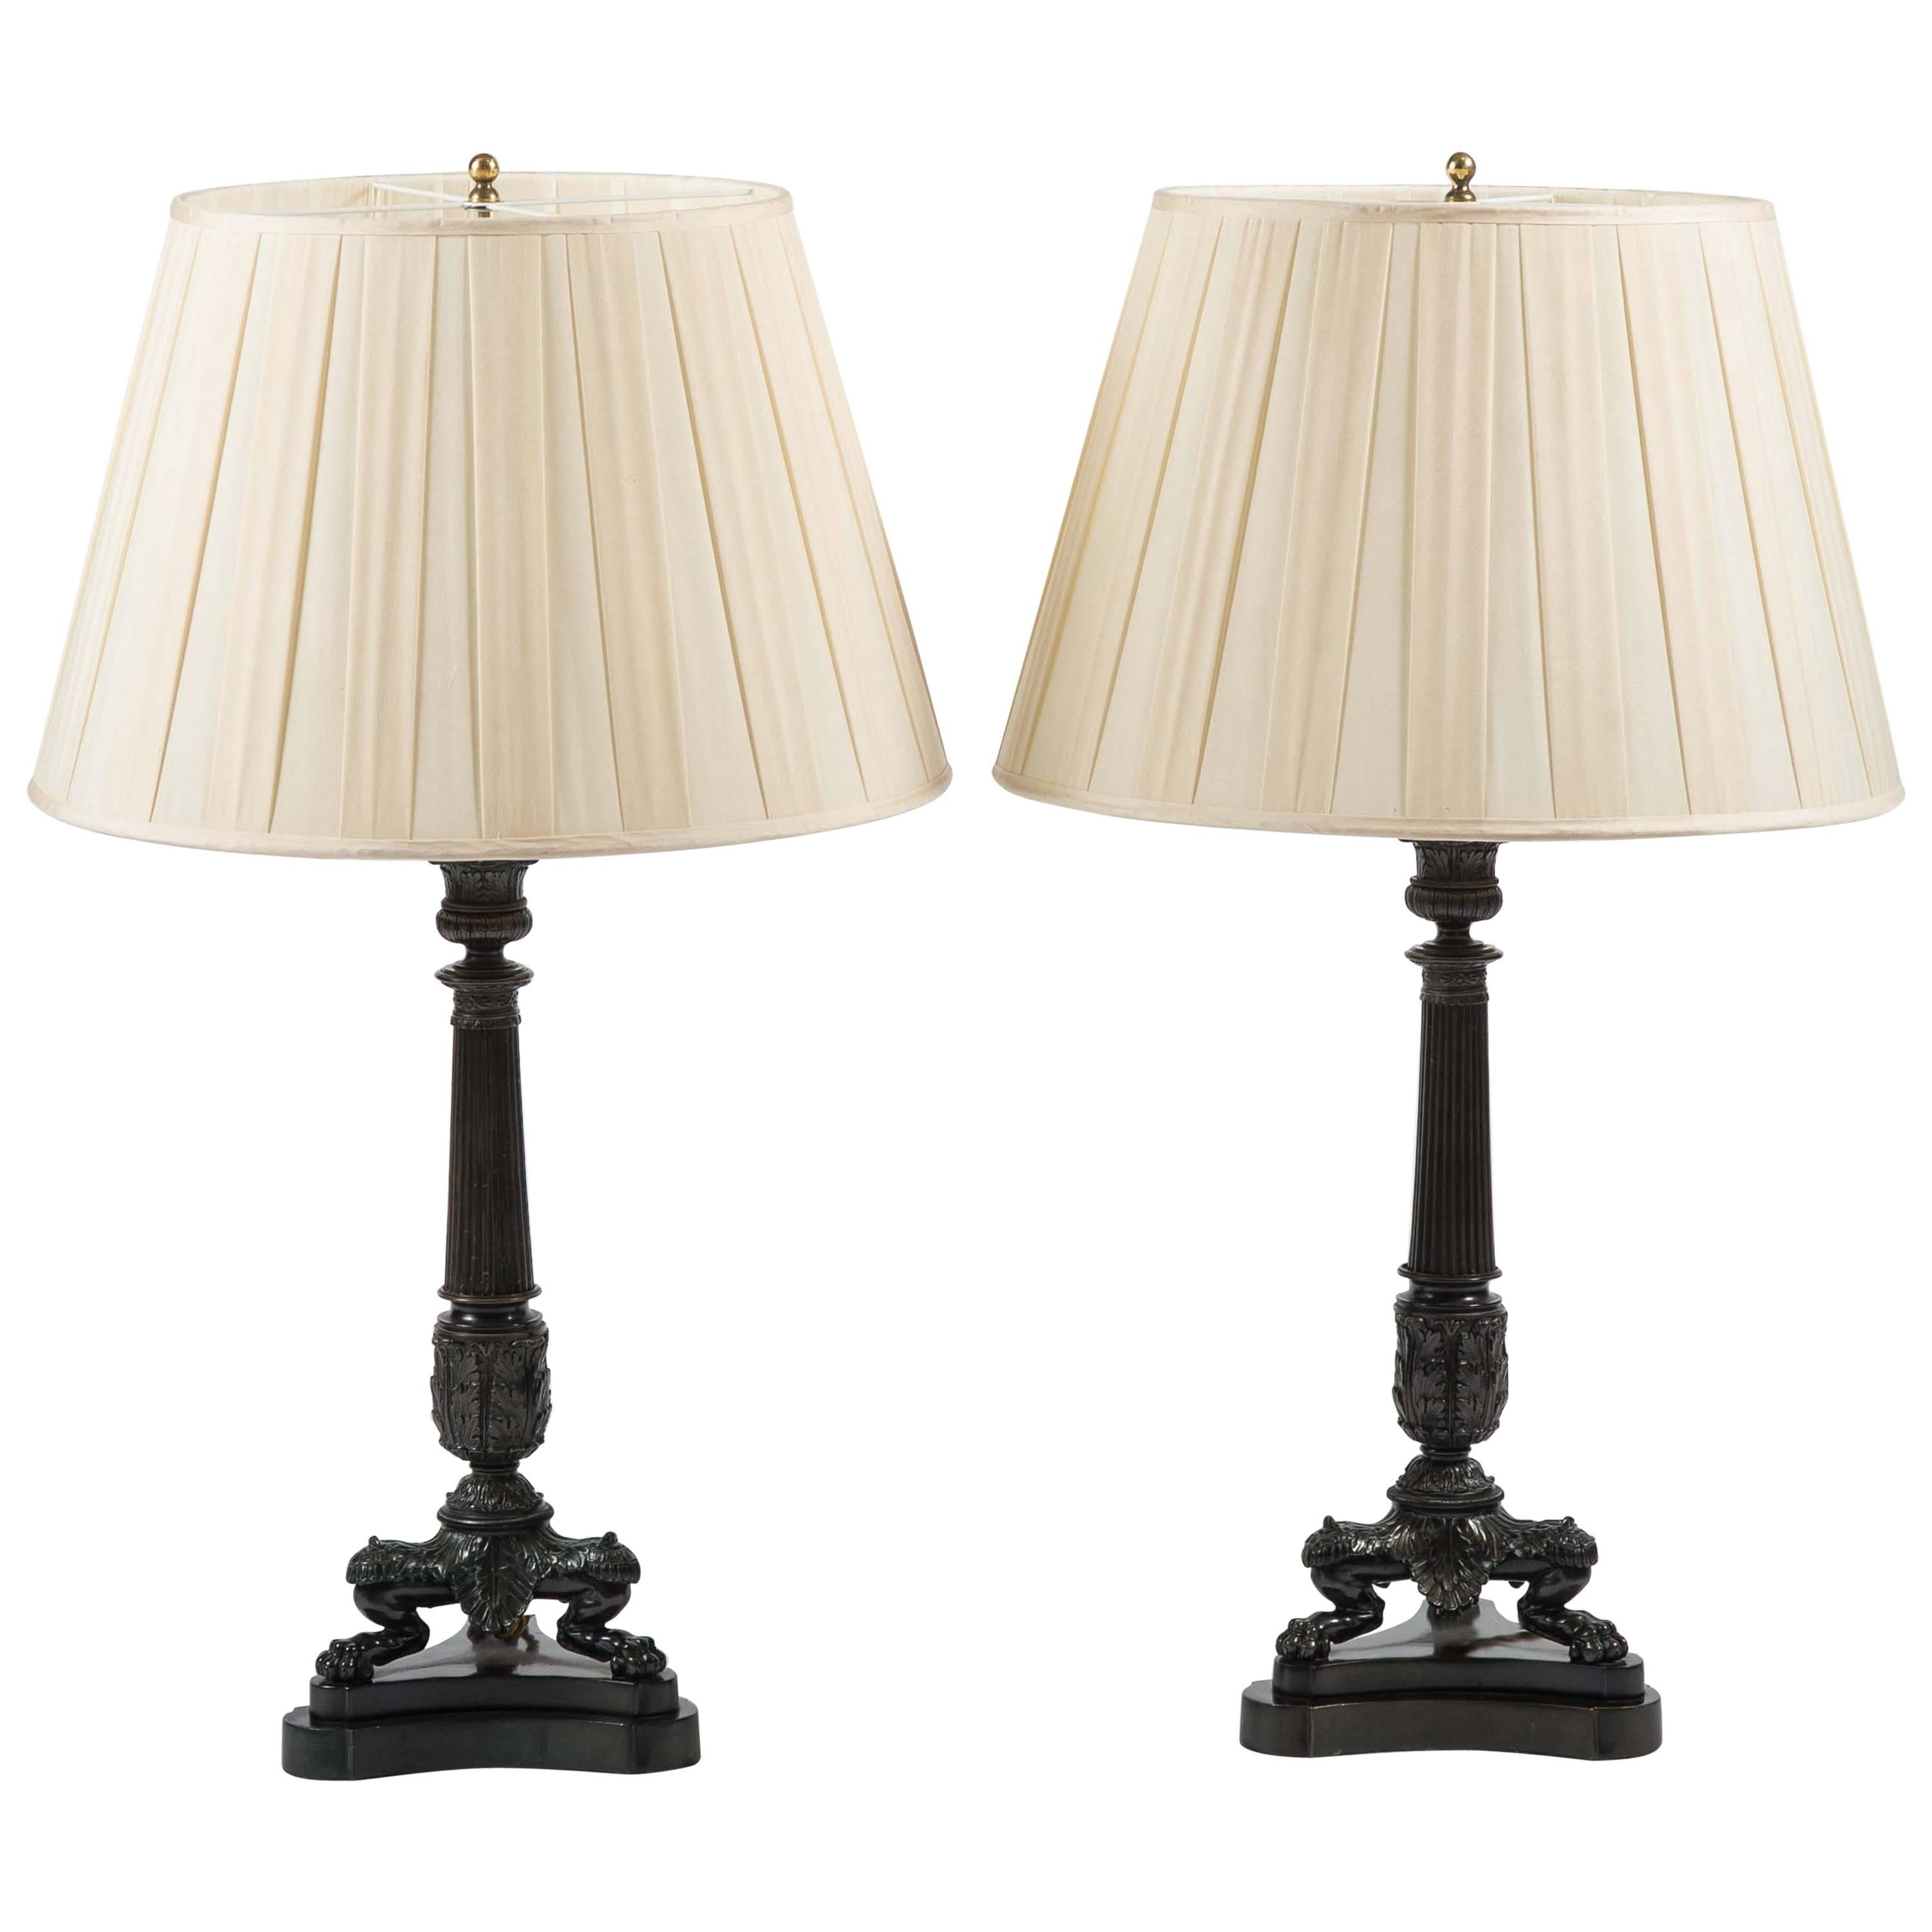 Pair of 20th Century Bronze Table Lamps in the Empire Style